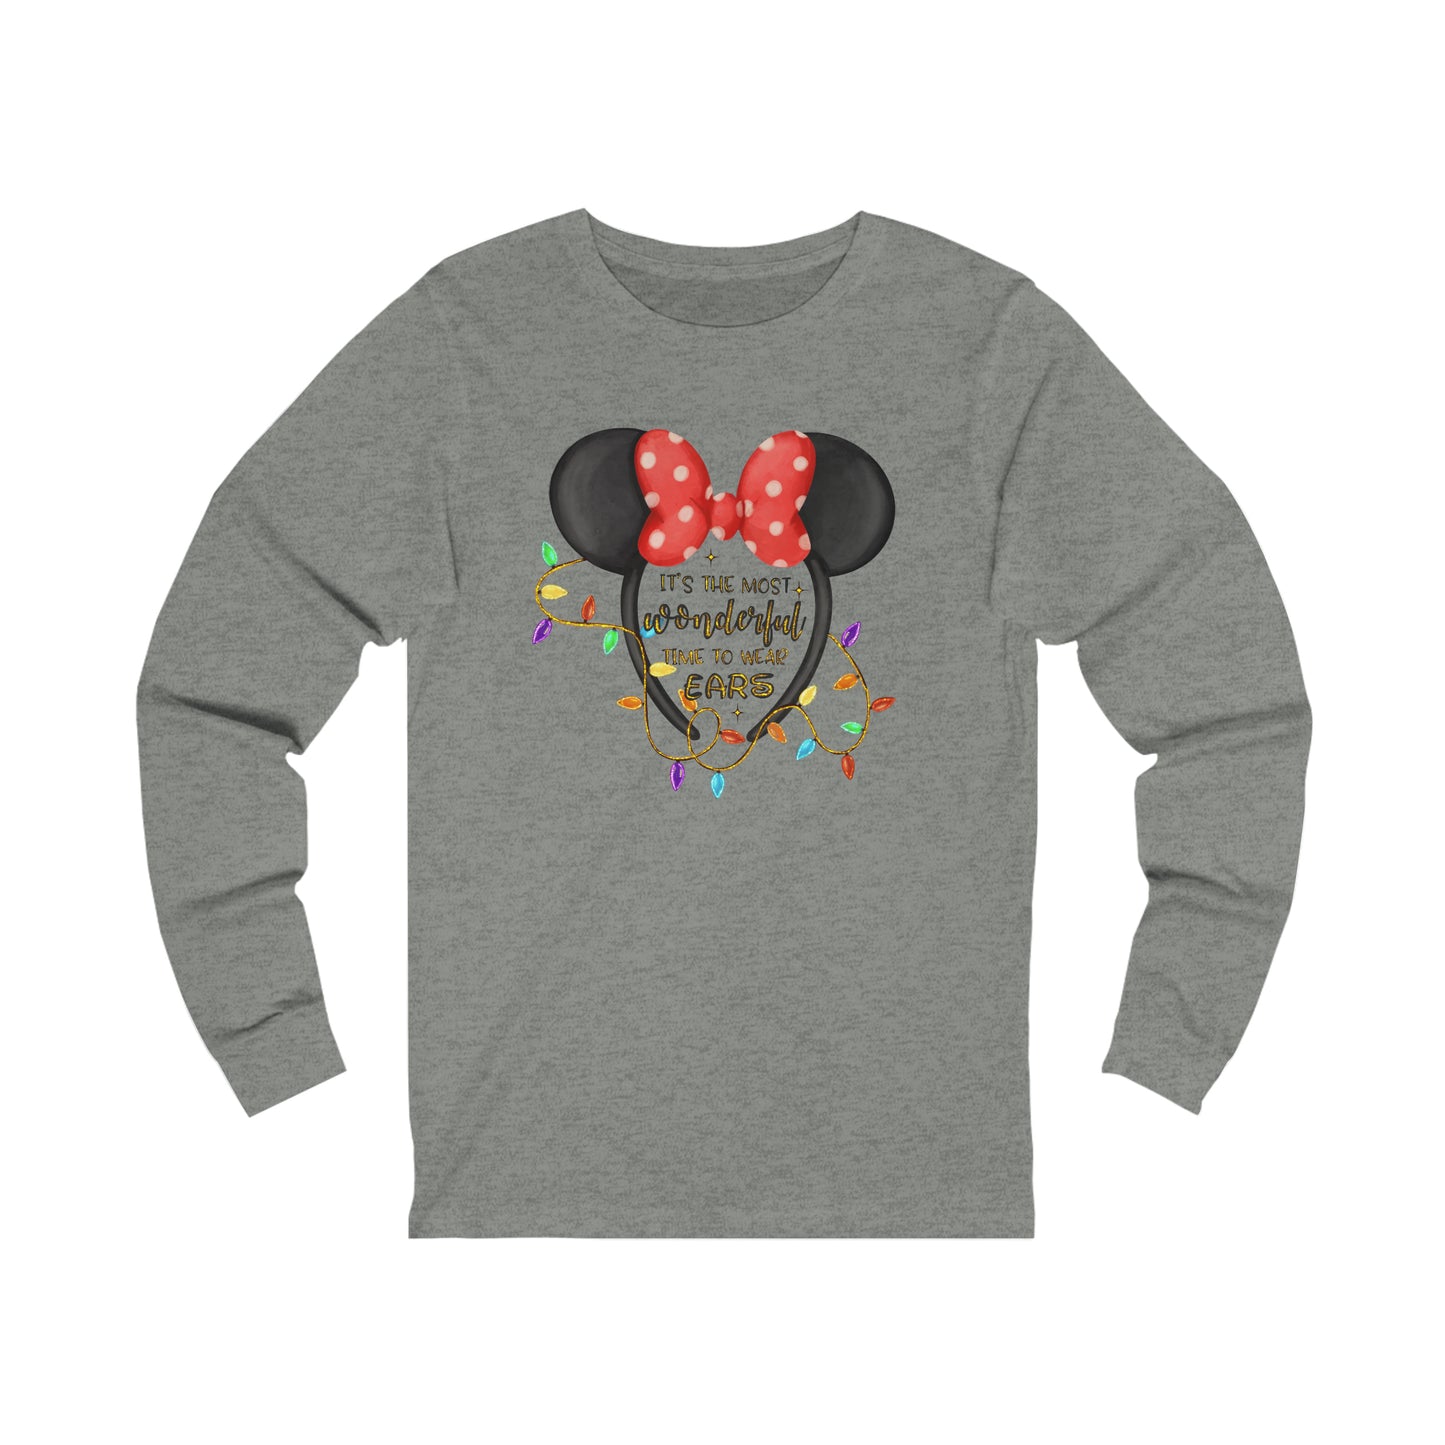 It's The Most Magical Time To Wear Ears Unisex Long Sleeve Graphic Tee